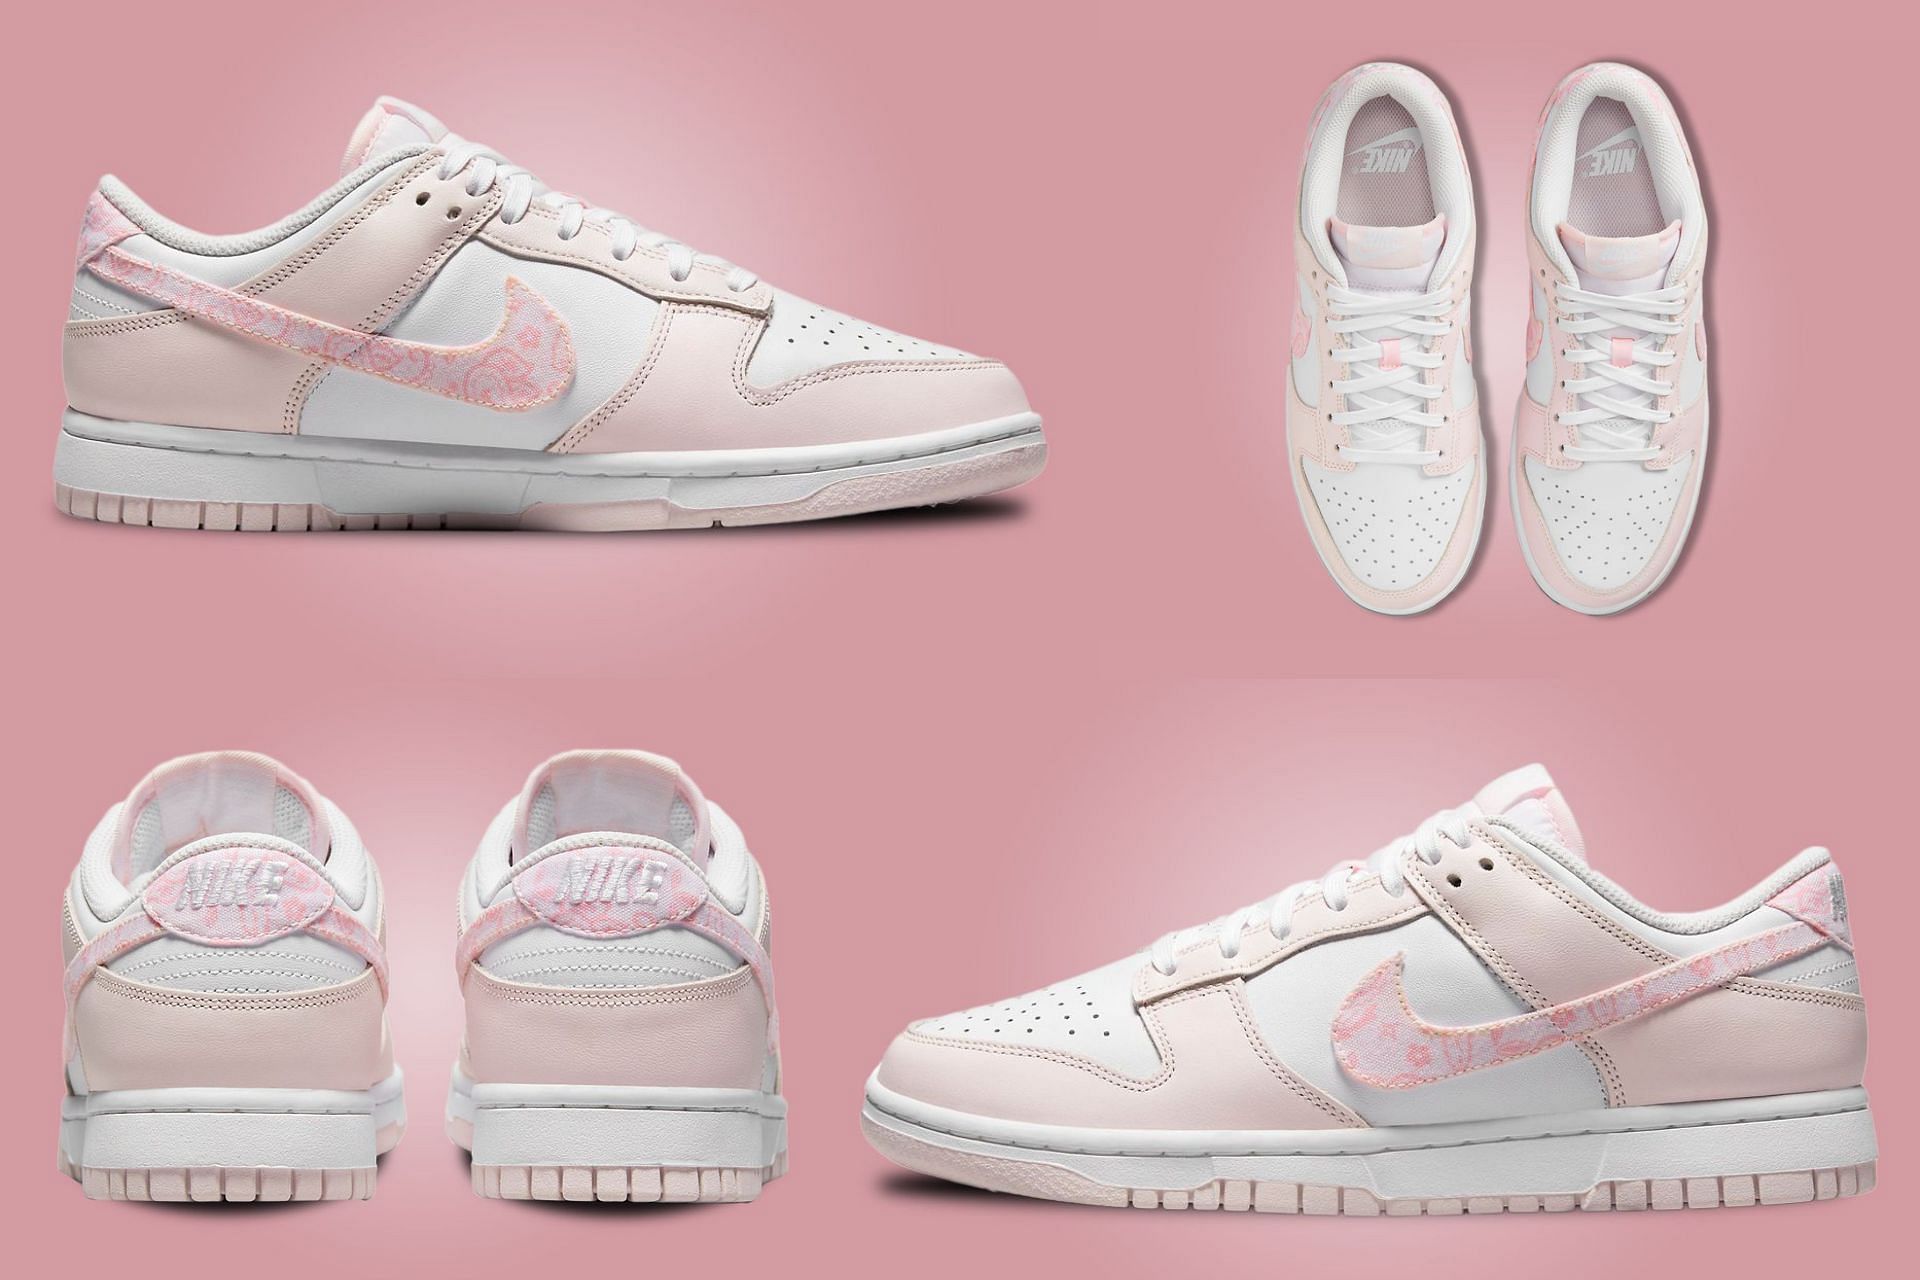 Pink Paisley Nike Dunk Low “Pink Paisley” shoes Where to buy, price